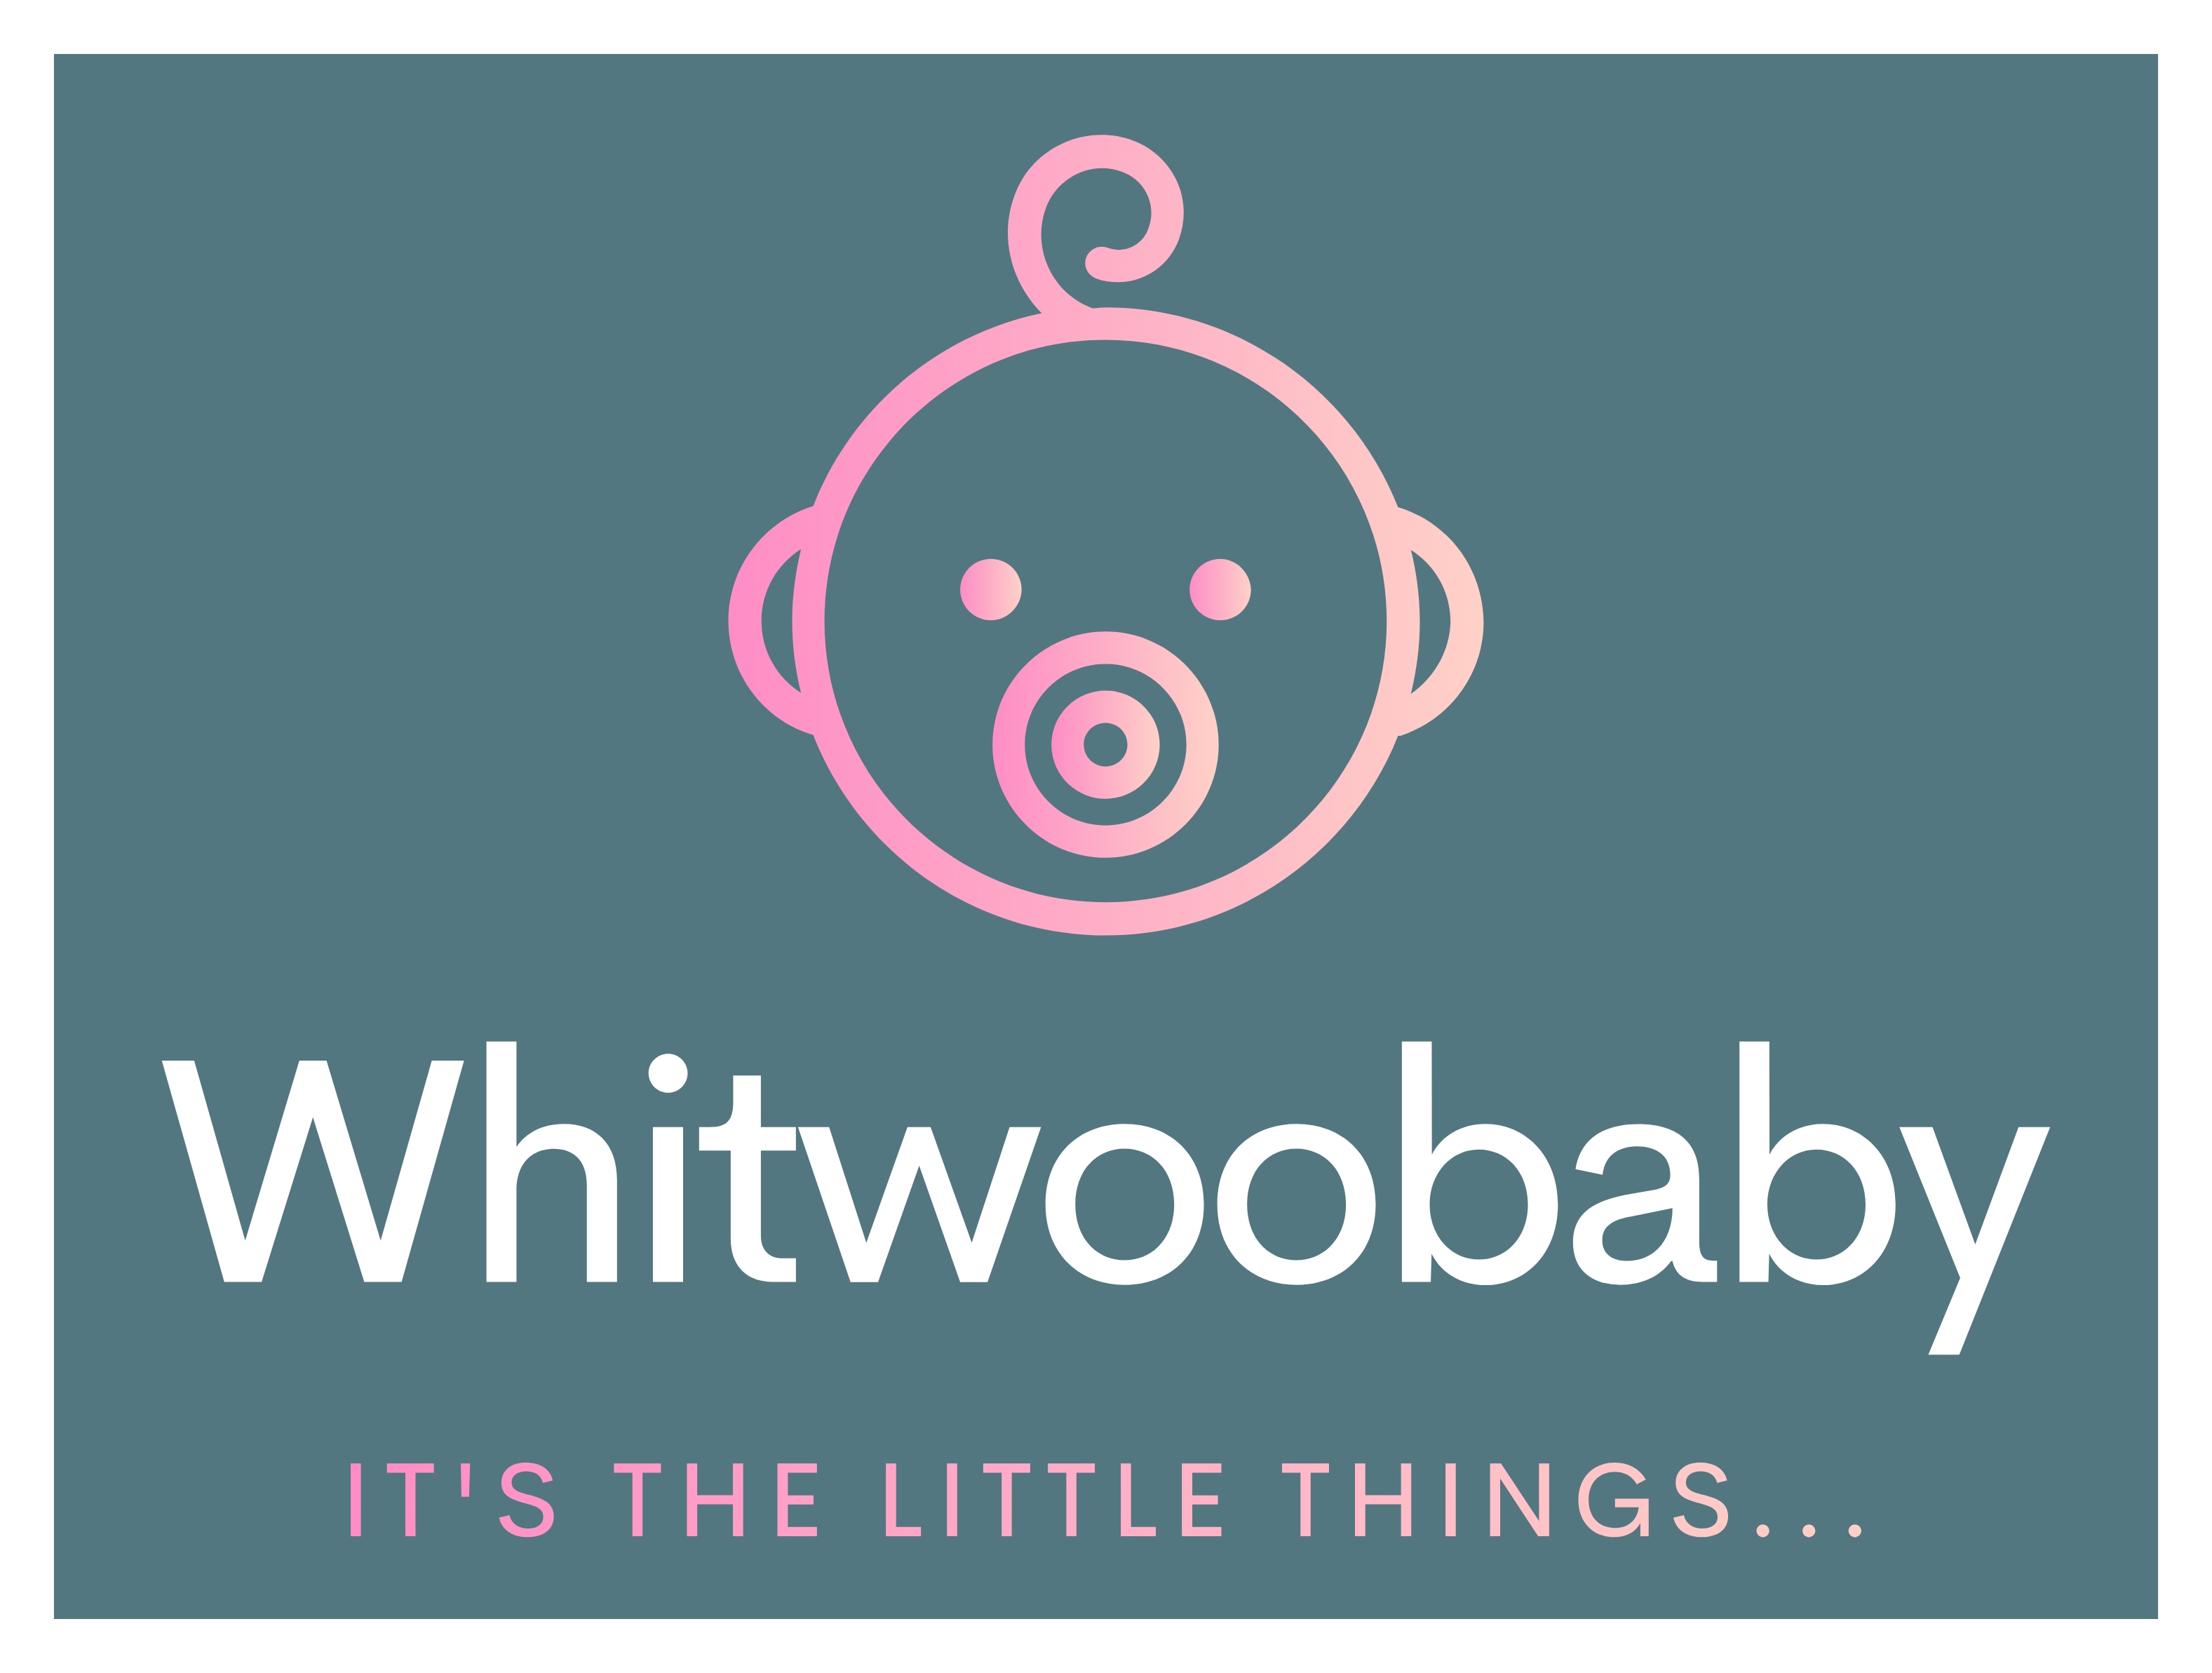 Whitwoobaby